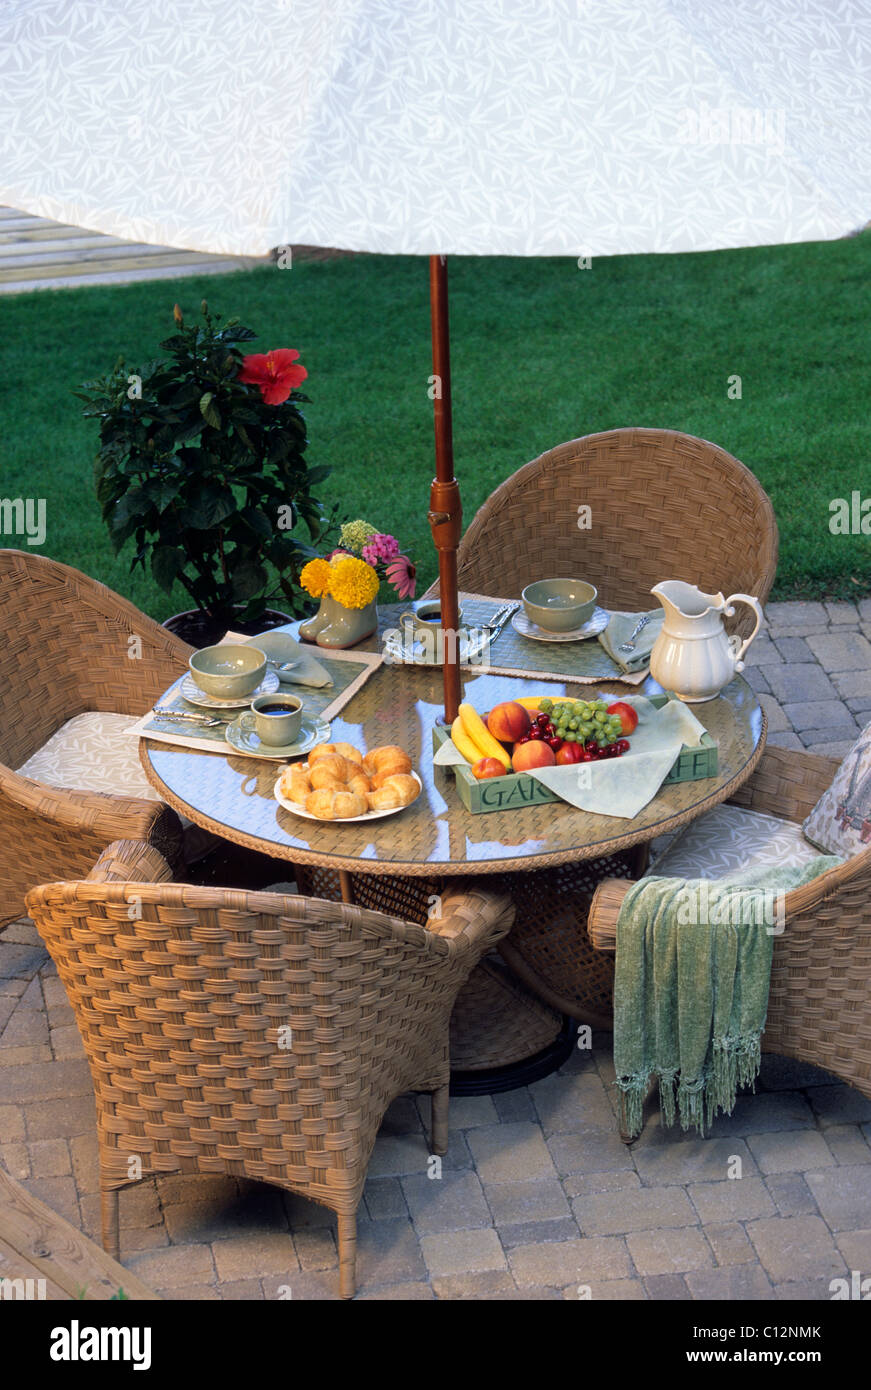 BREAKFAST ON THE PATIO OF AMERICAN HOME.  SUMMER. Stock Photo